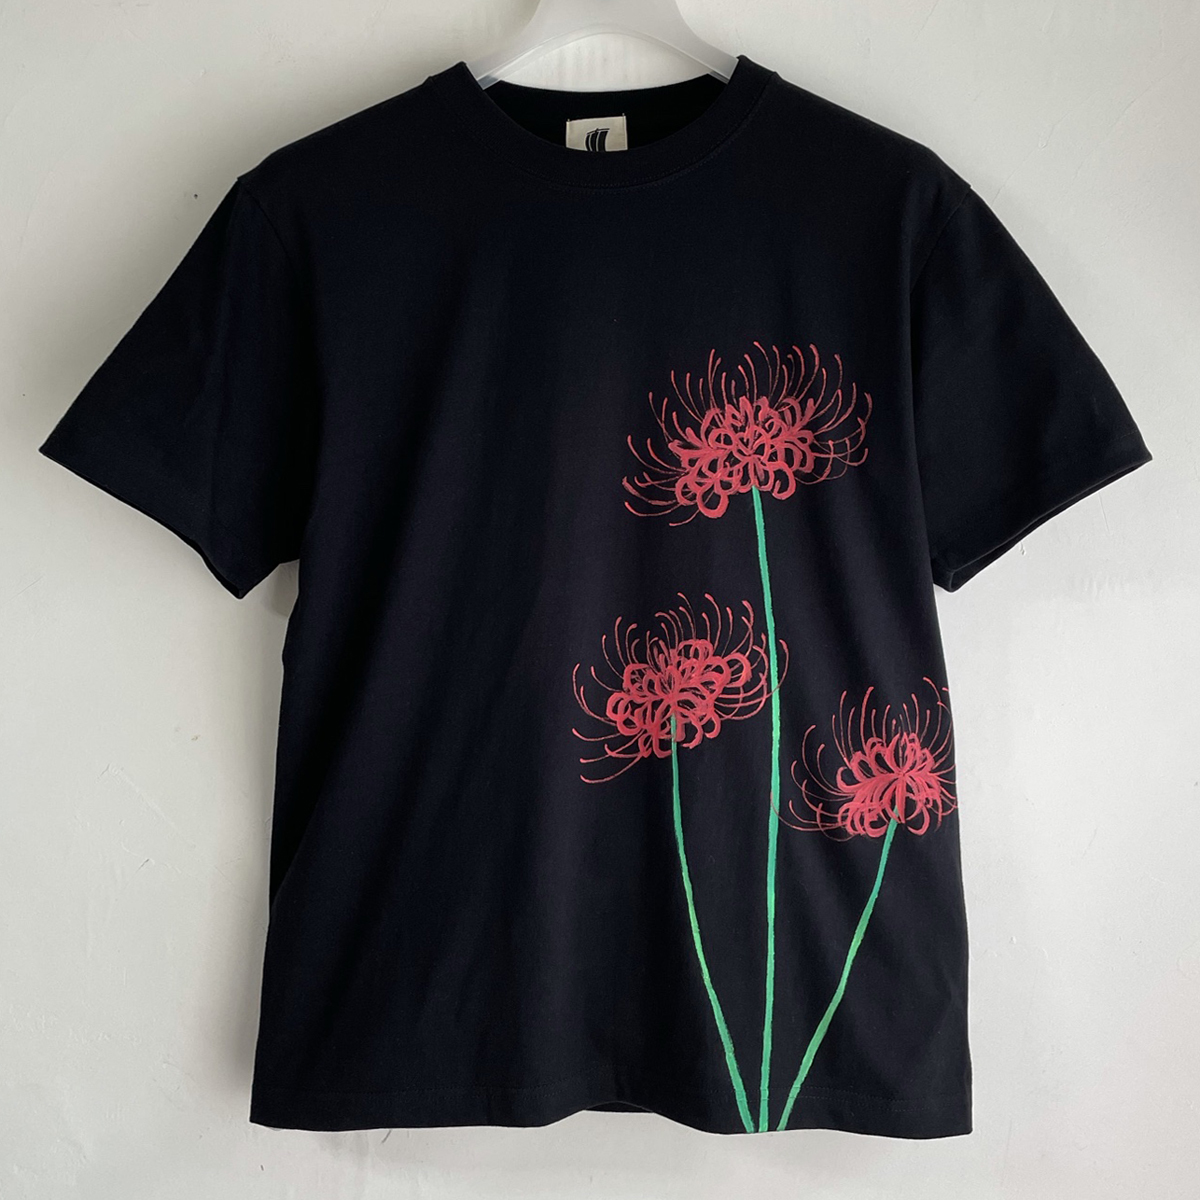 Men's T-shirt, XL size Red spider lily pattern T-shirt, black, handmade, hand-painted T-shirt, Japanese pattern, floral pattern, autumn/winter, XL size and above, round neck, patterned